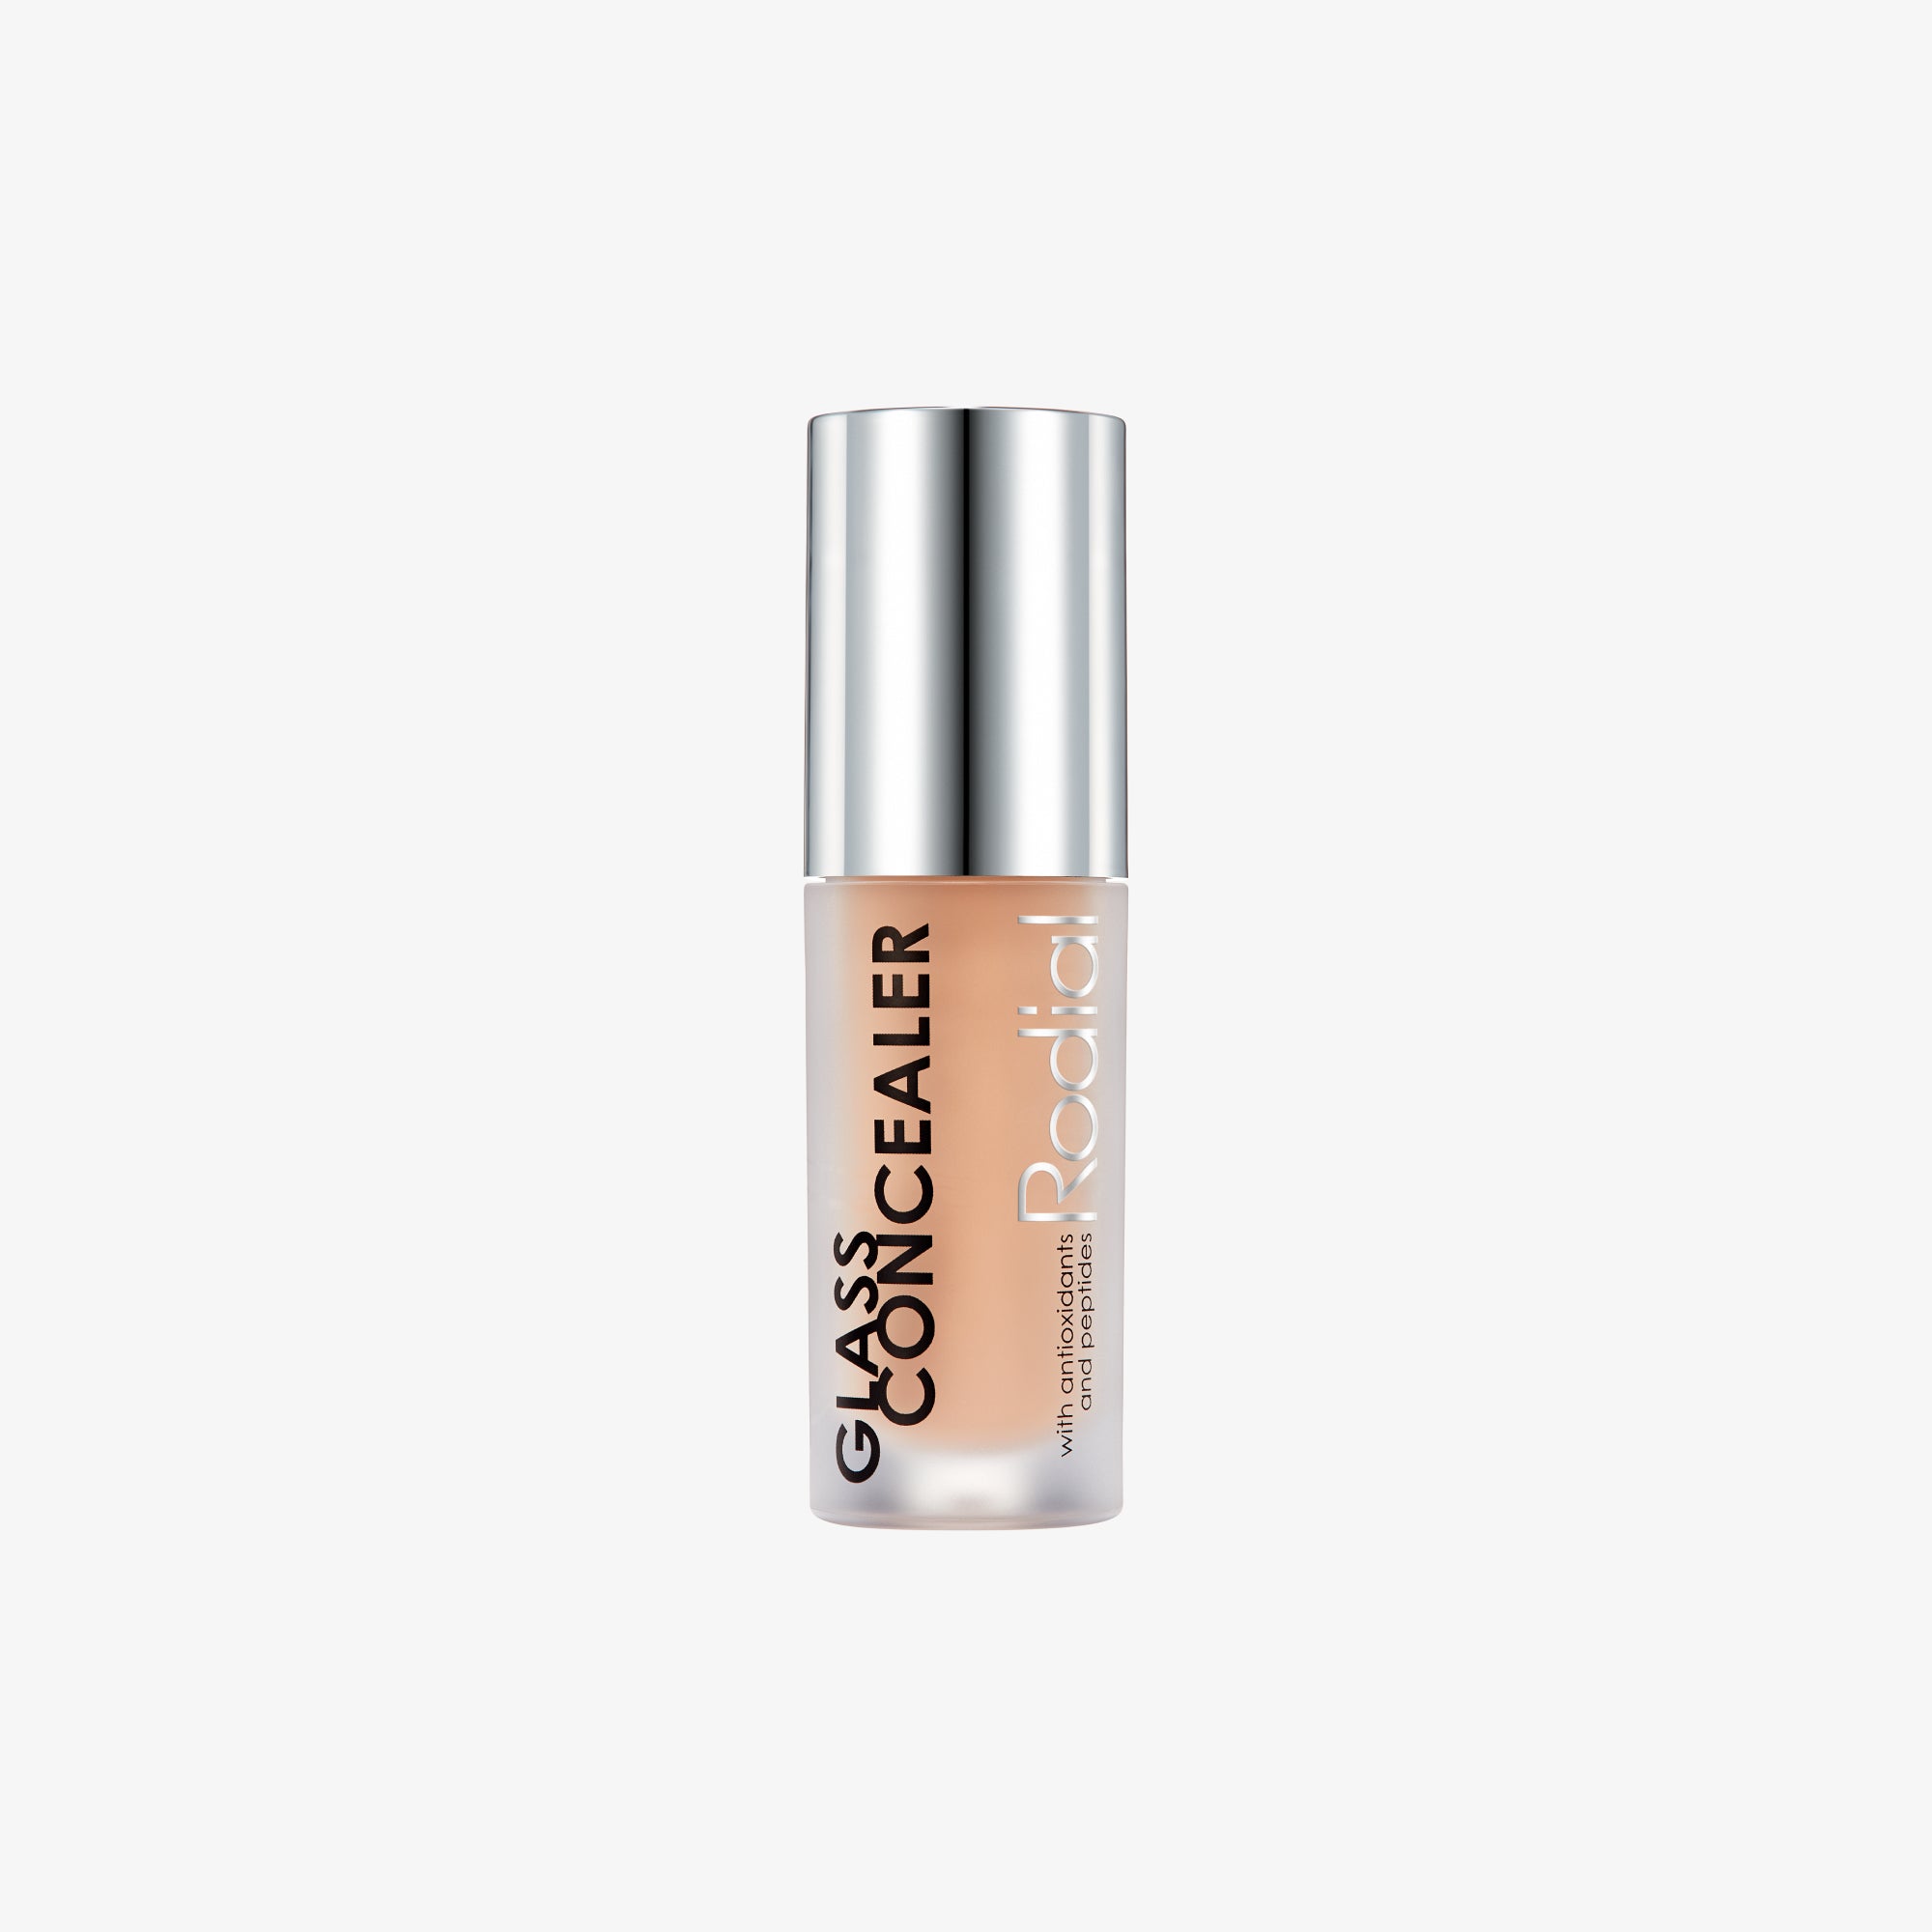 Glass Concealer - Available in 5 shades